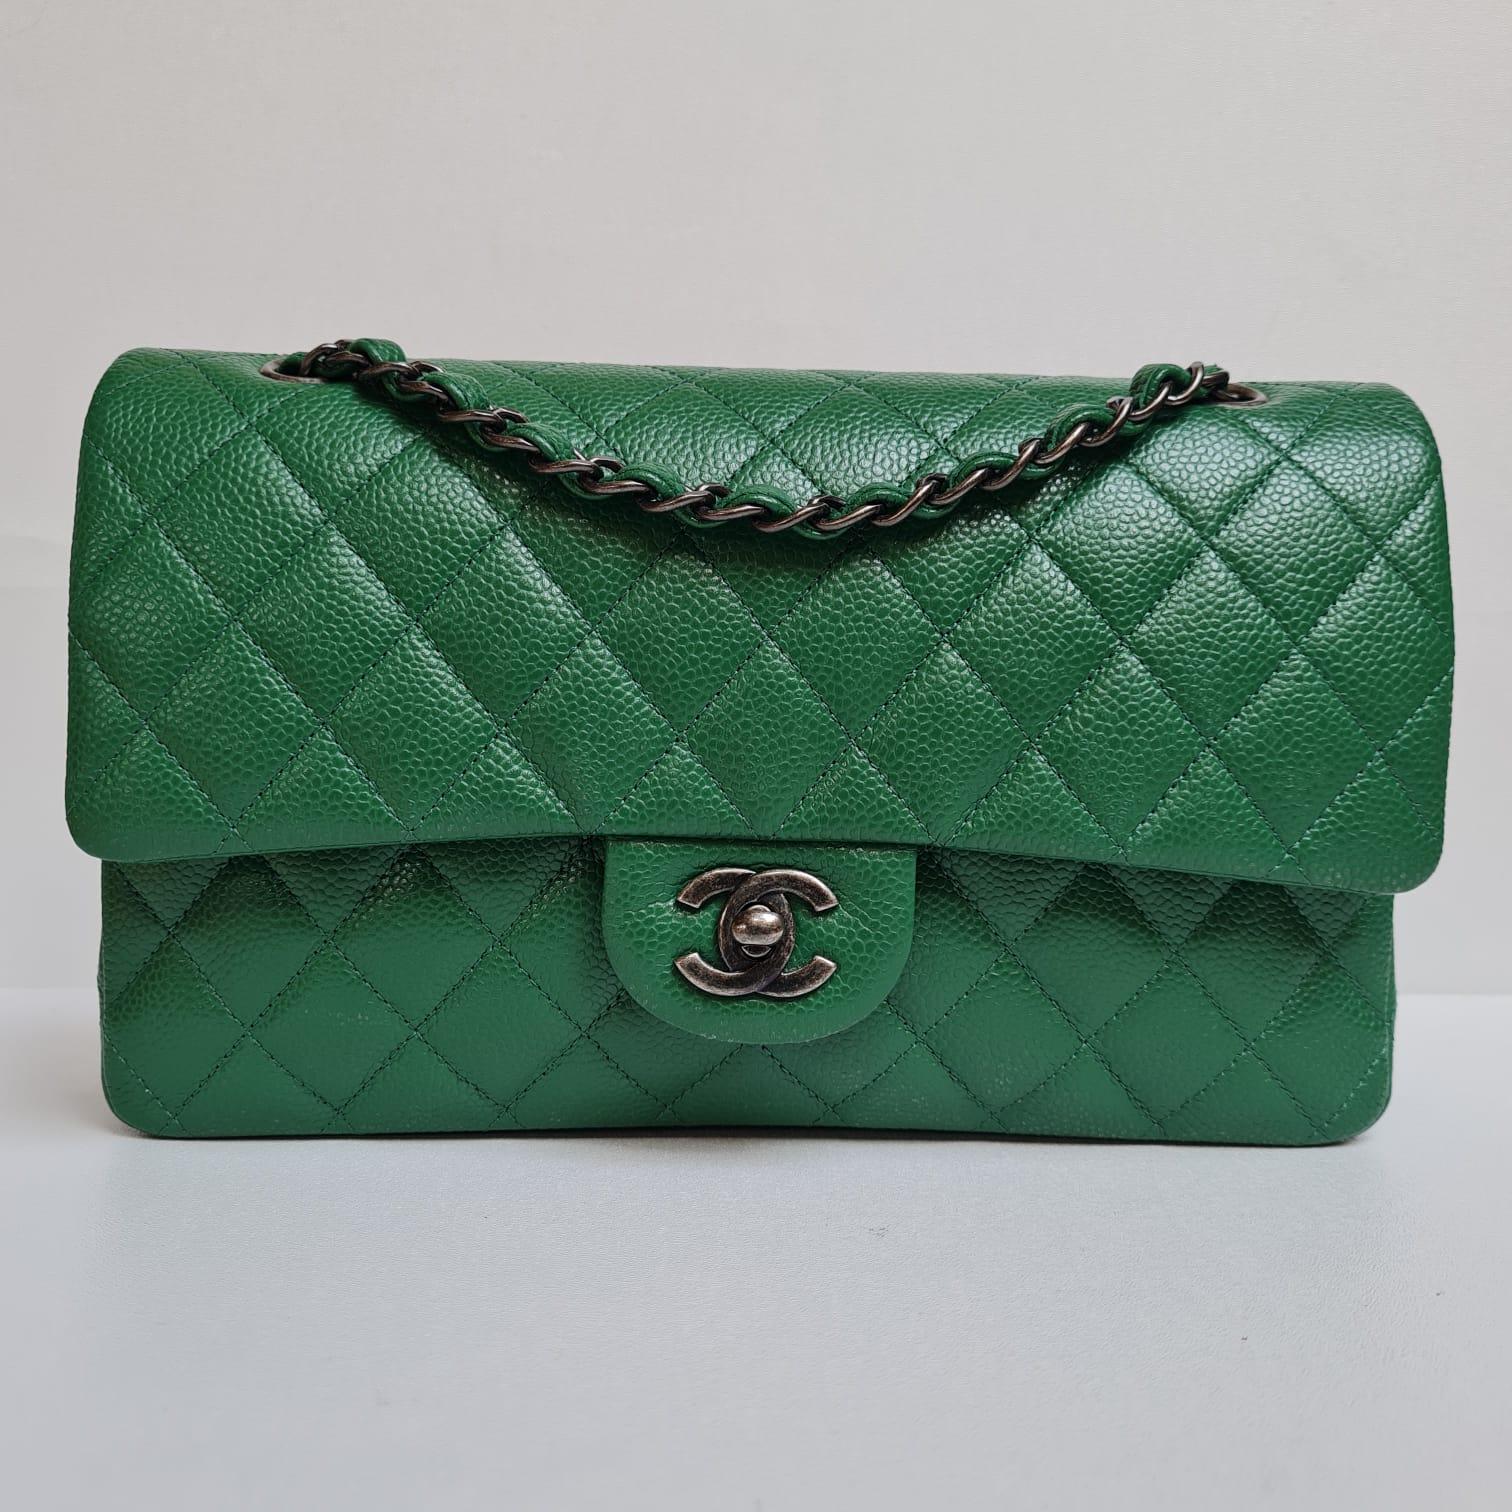 Rare Chanel Emerald Green Caviar Quilted Classic Medium Double Flap Bag RHW 14